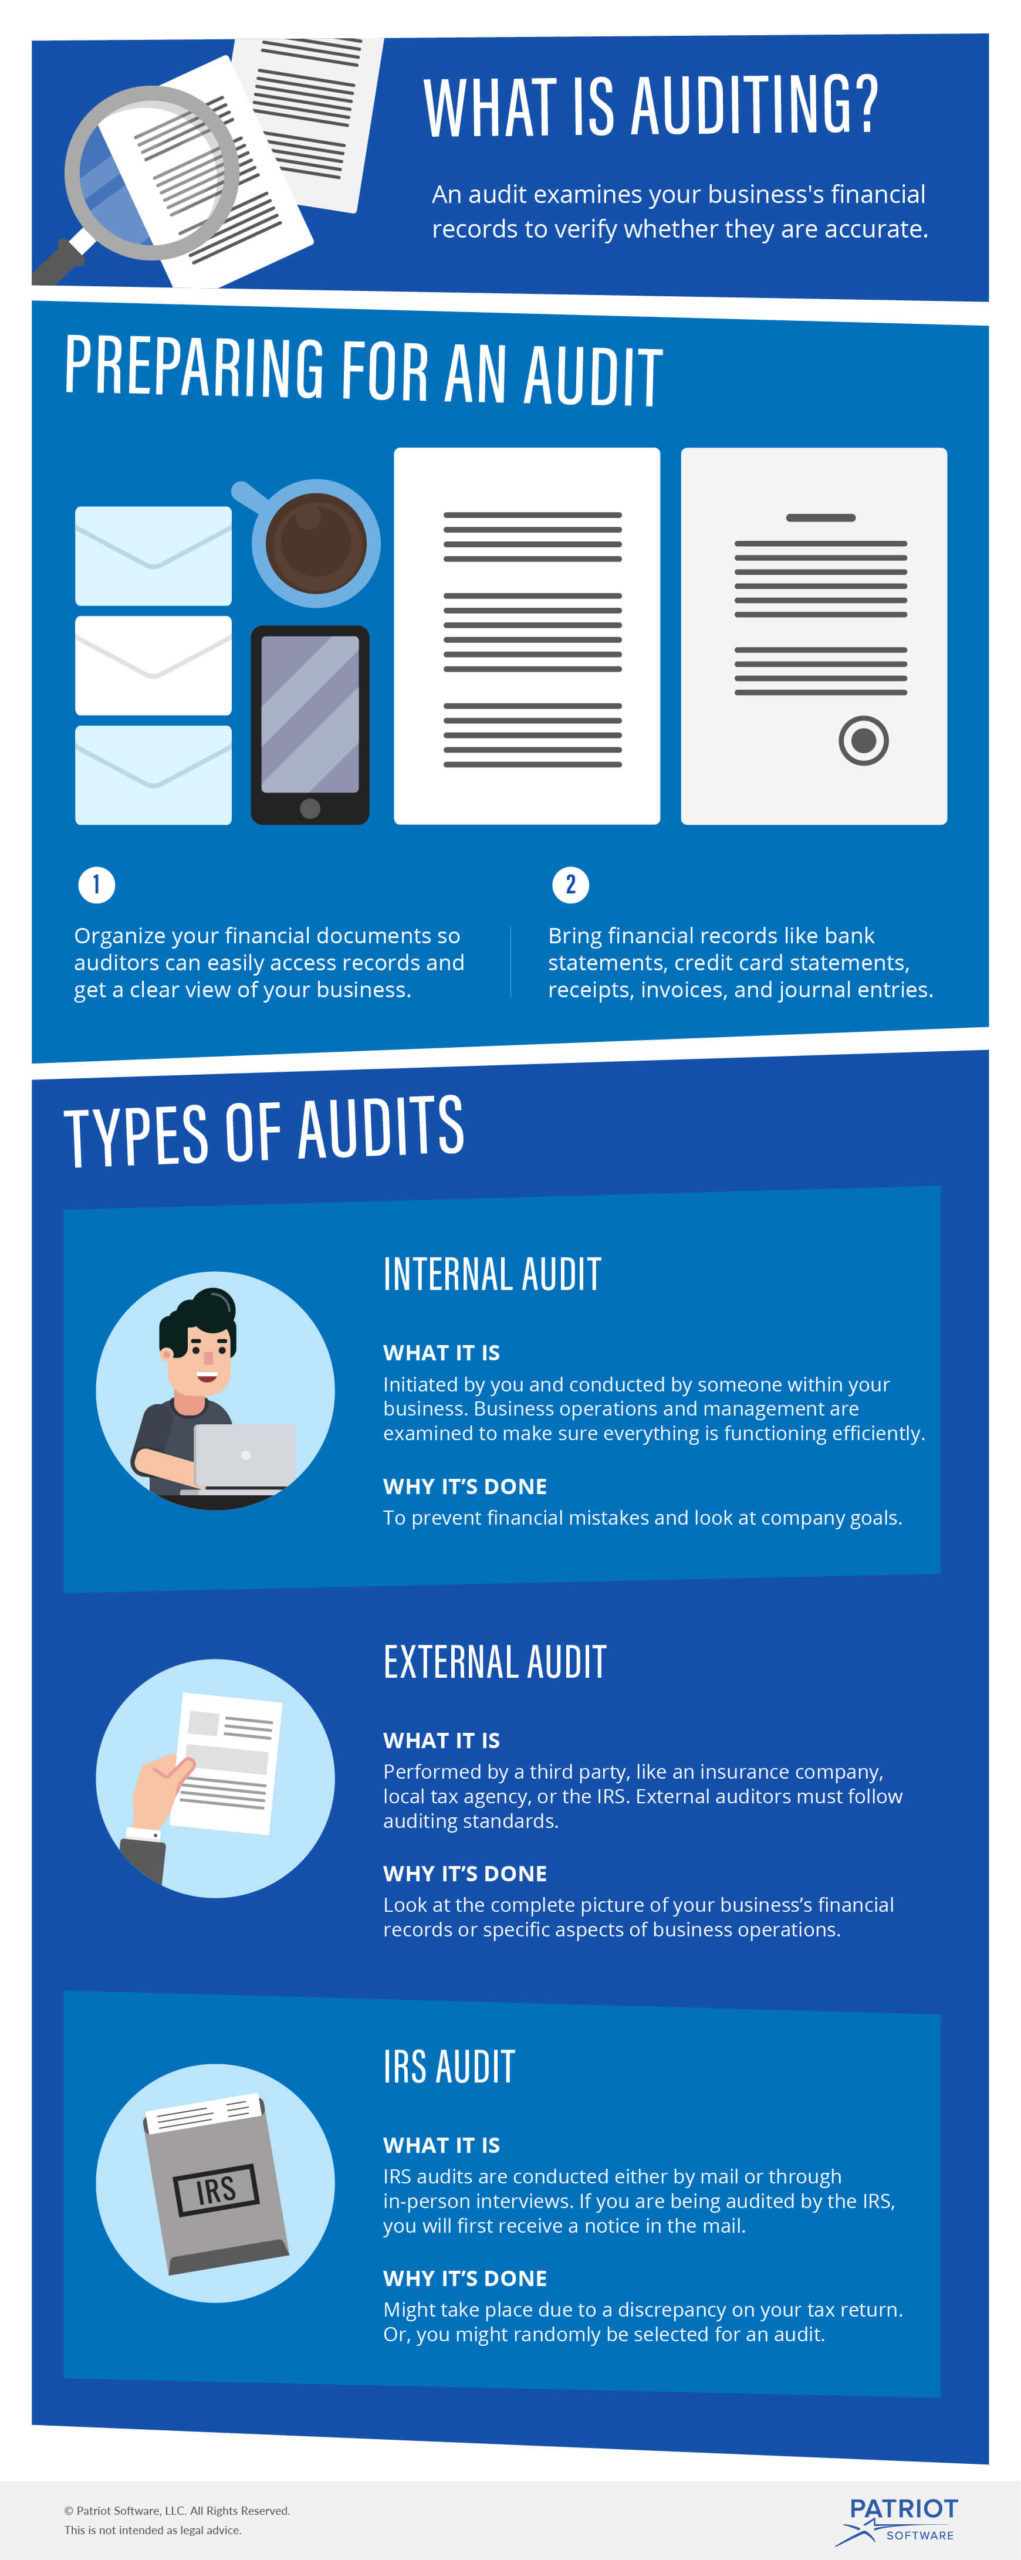 What is an audit